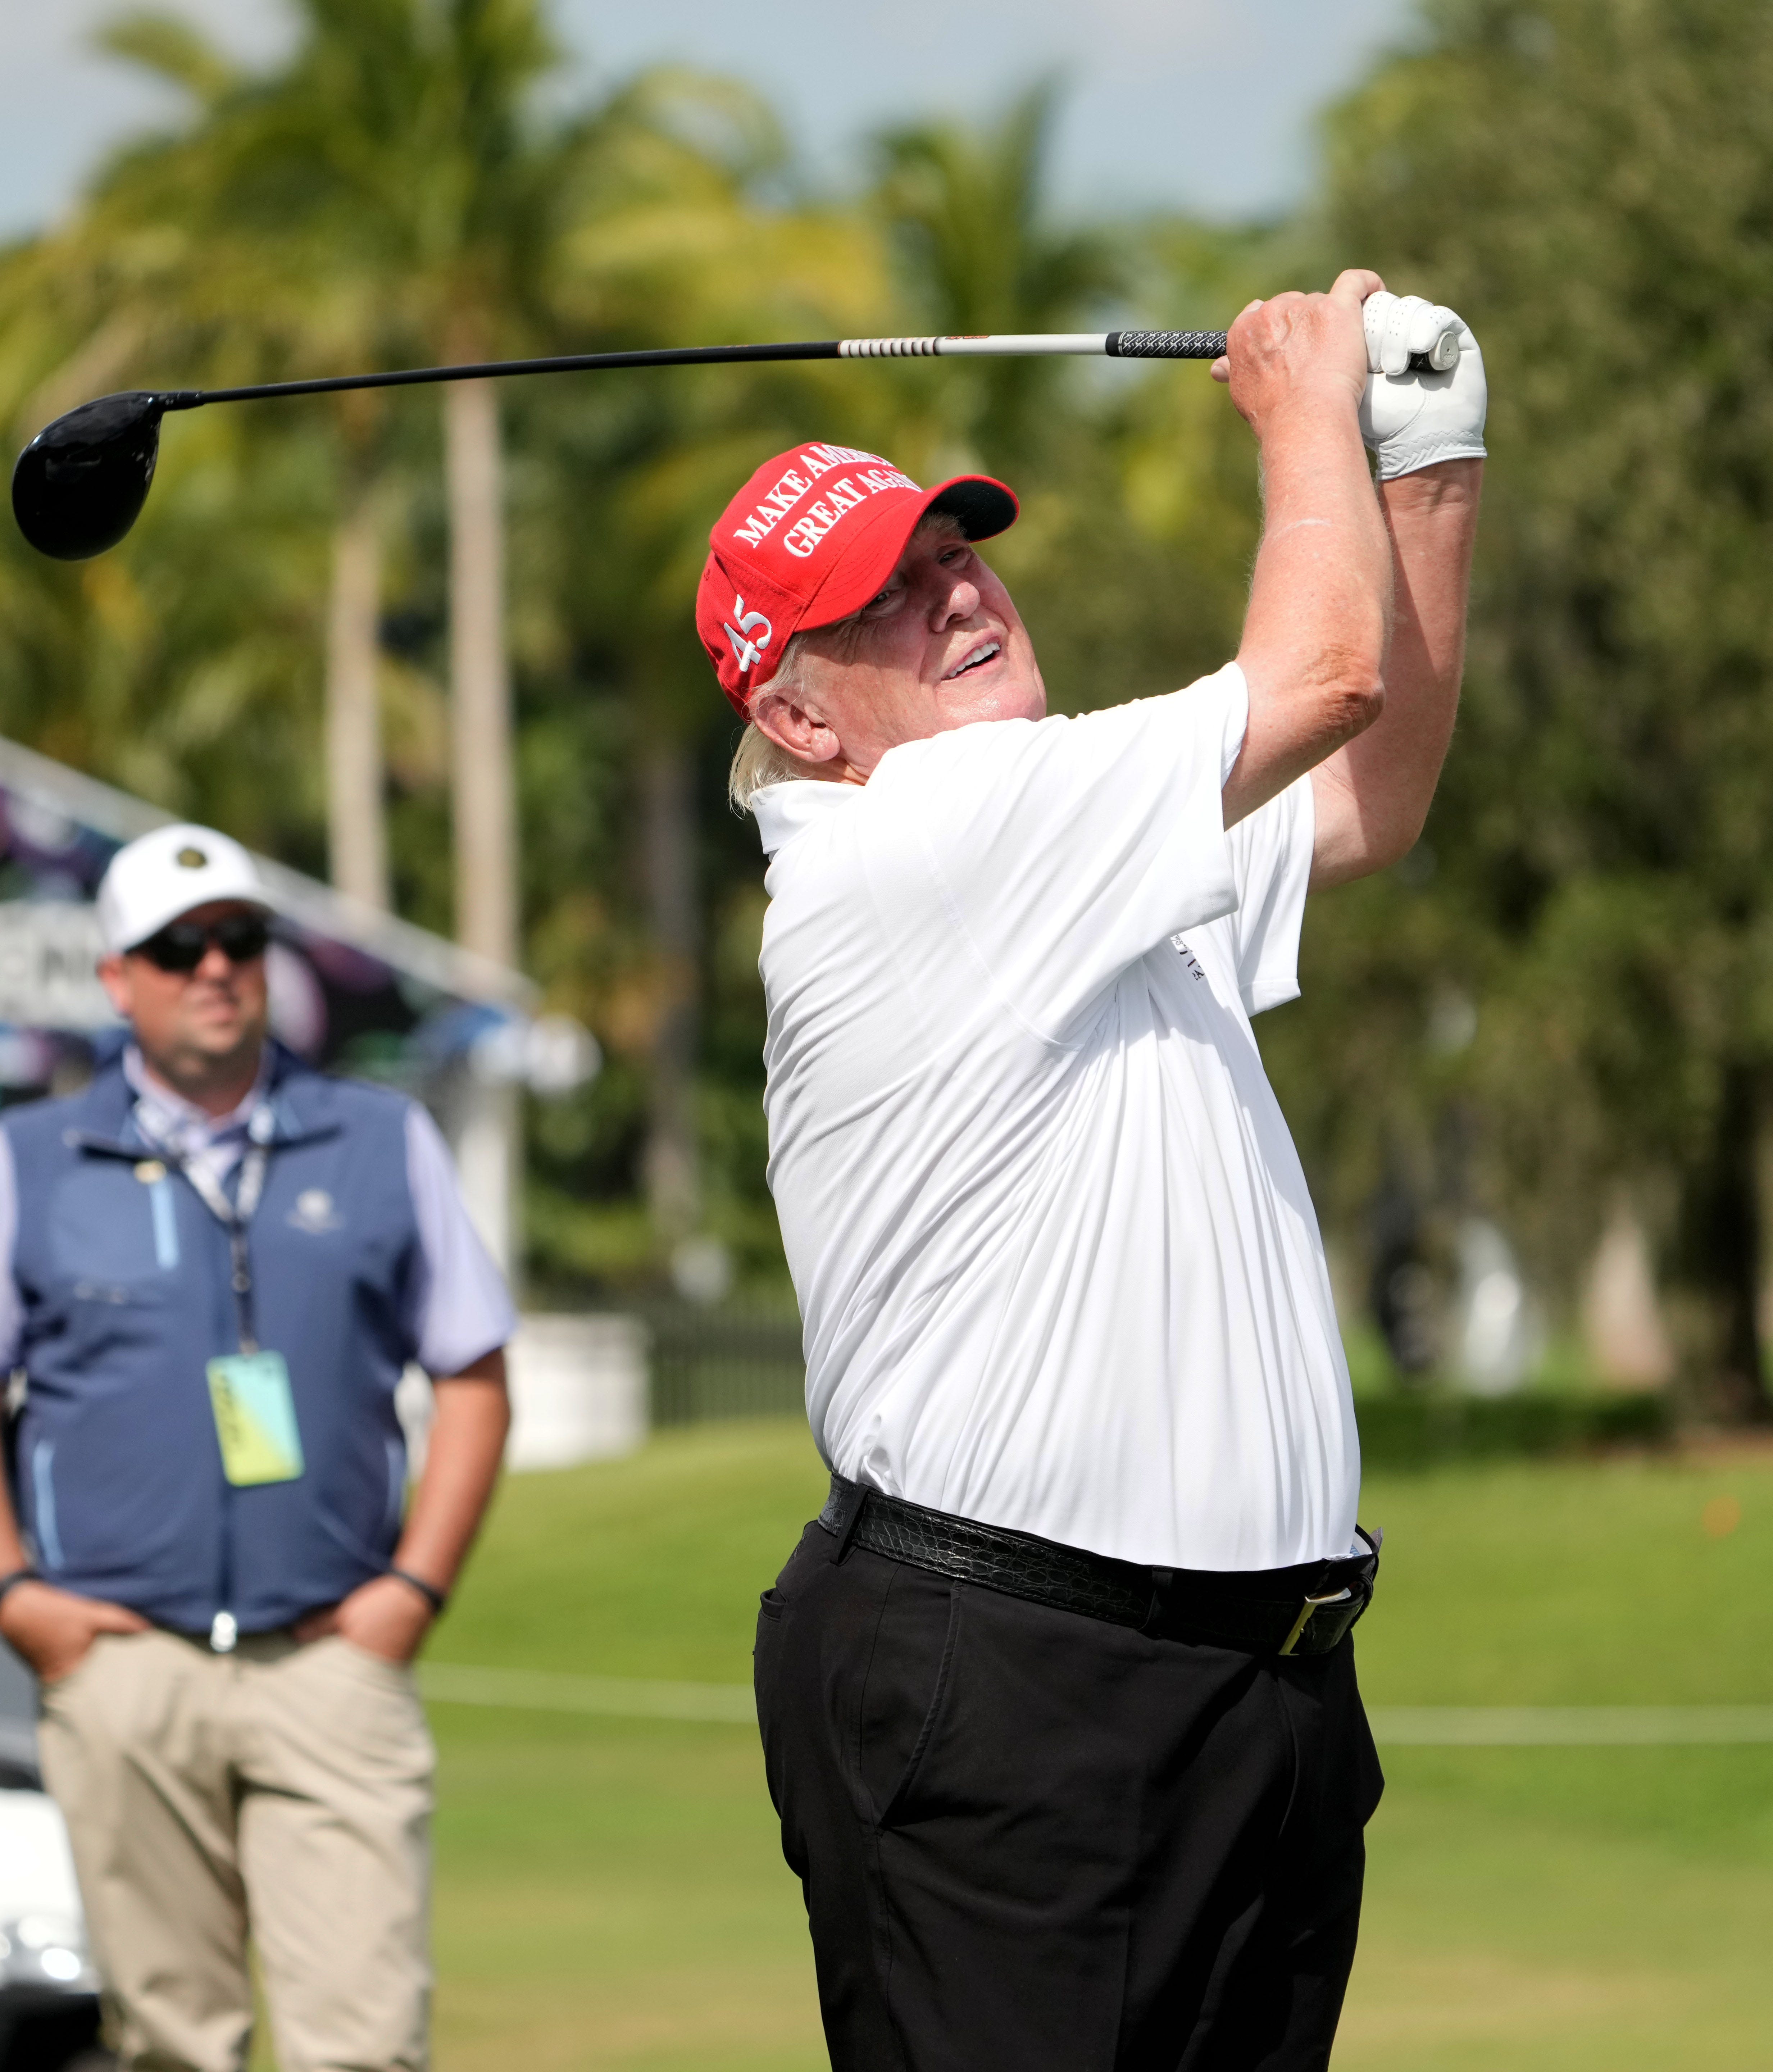 Trump declares himself the winner of his own club championship – in the Trumpiest way ever